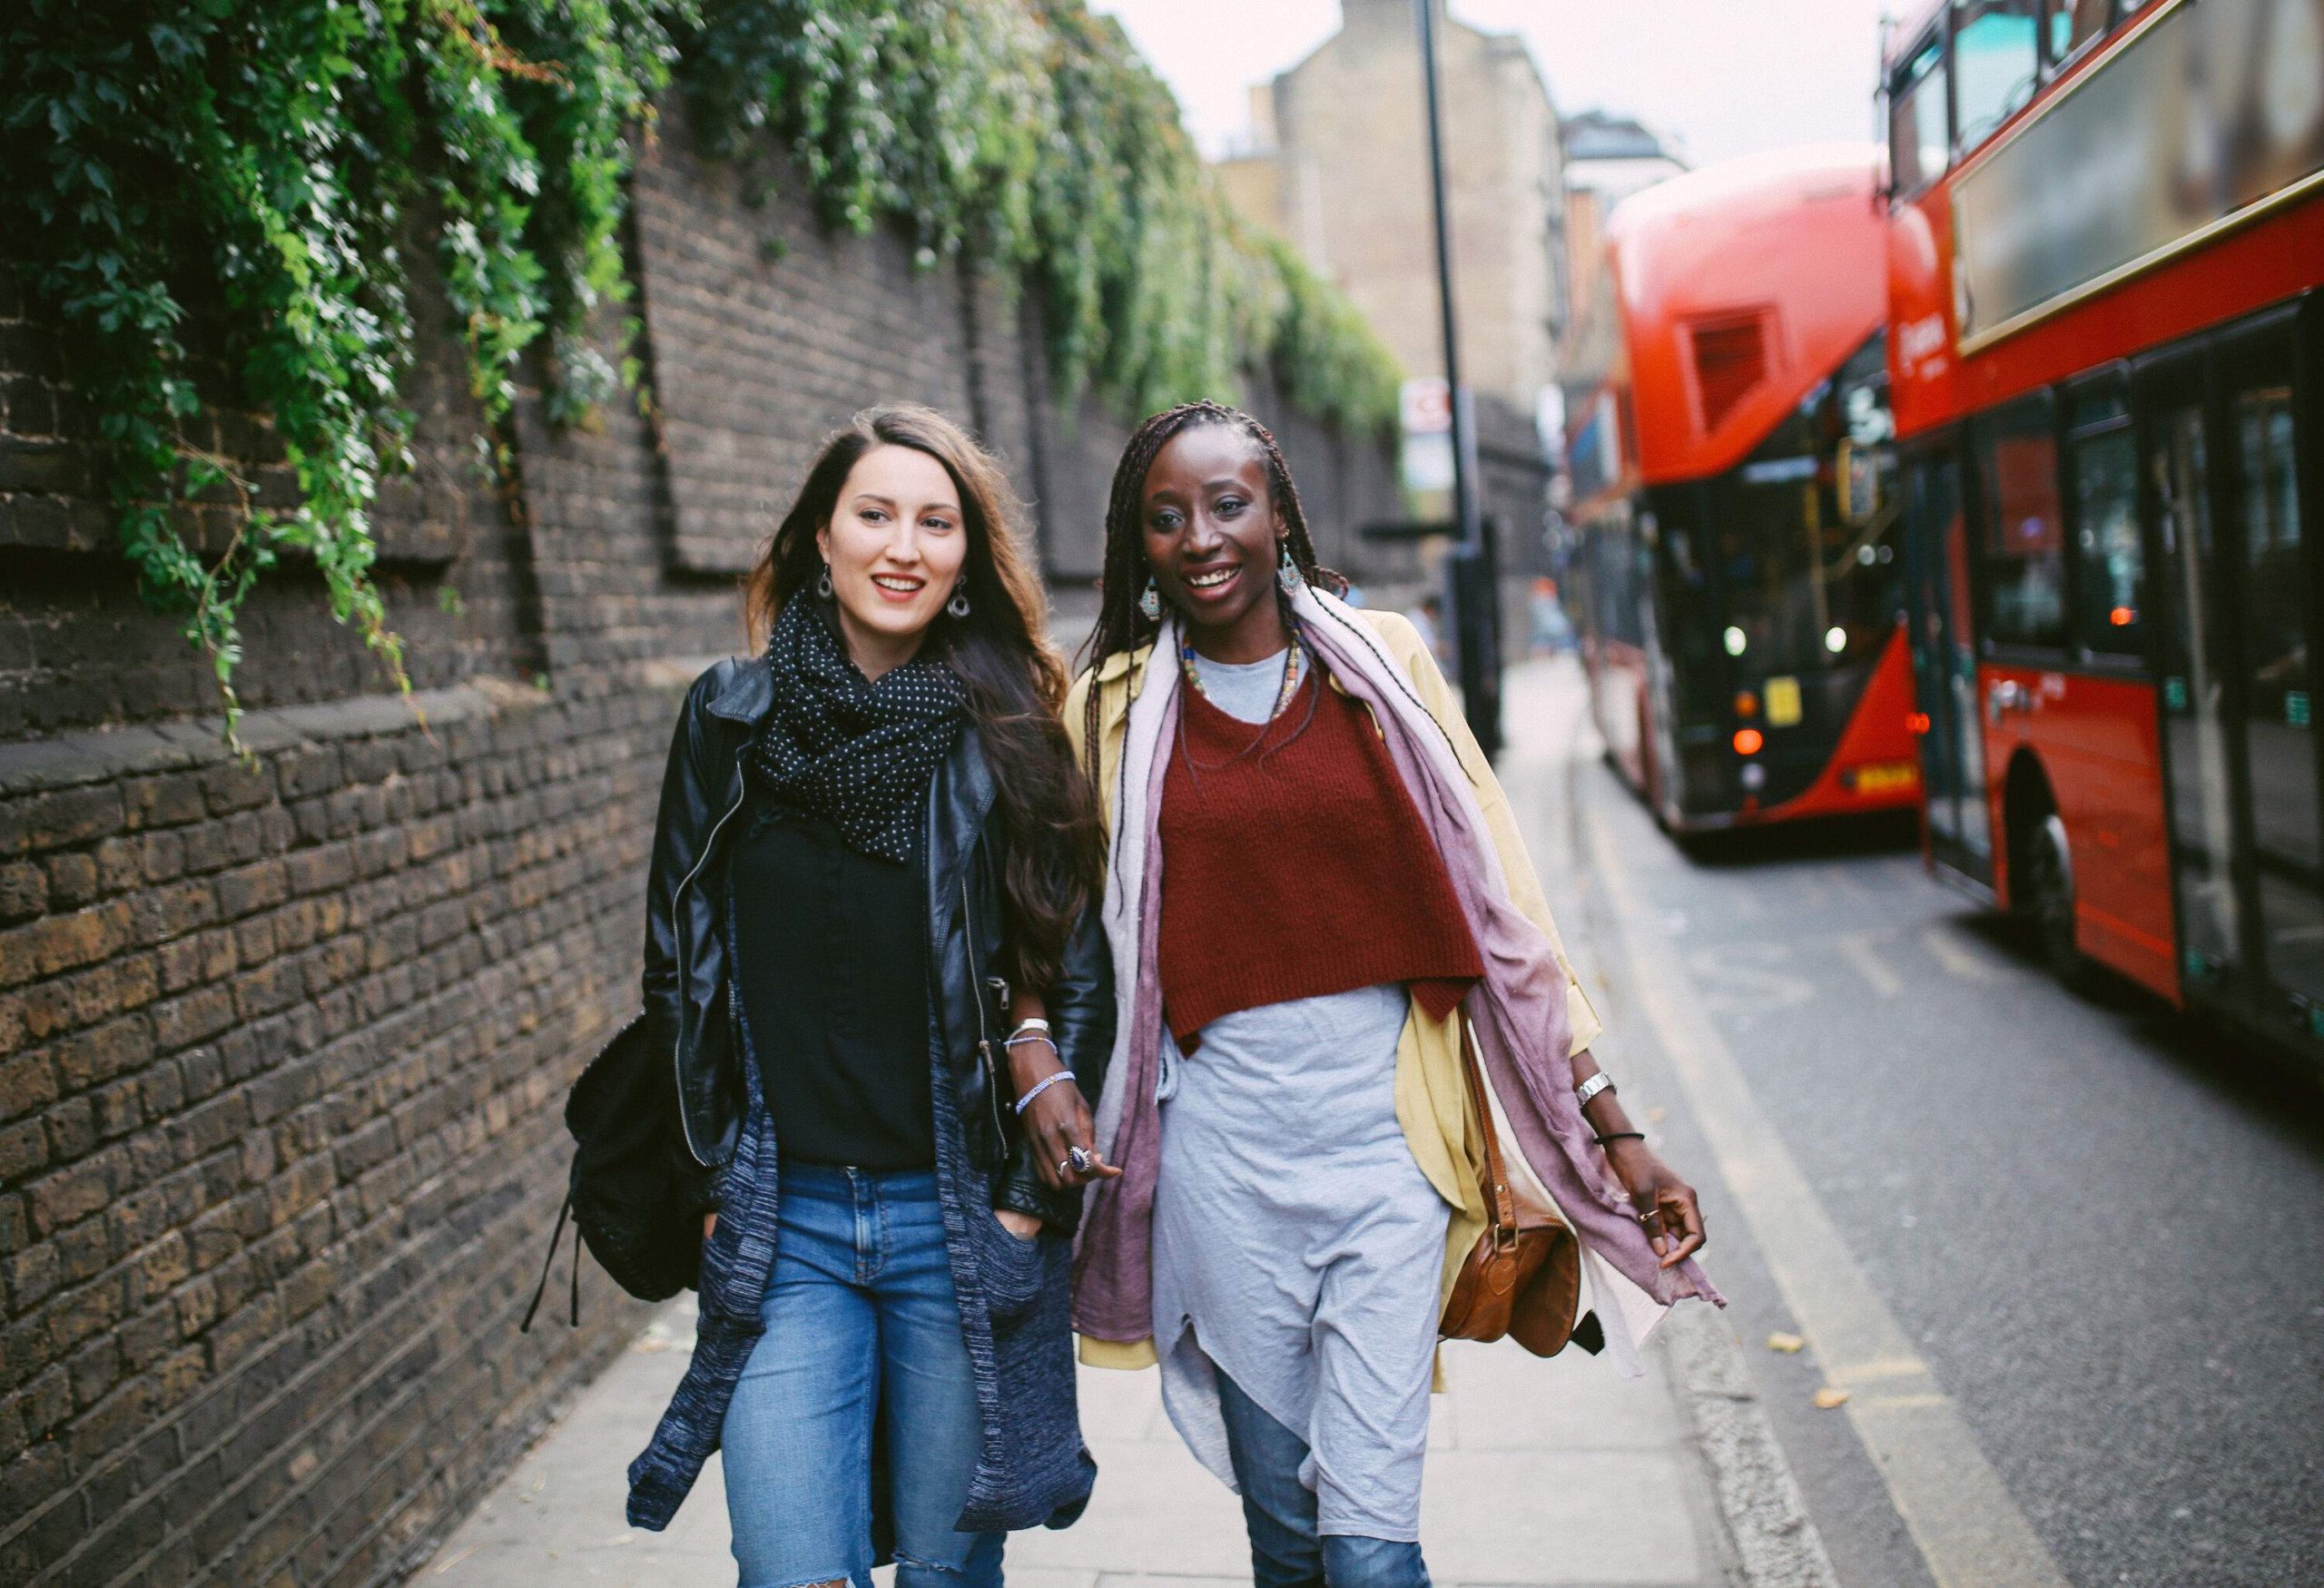 Two women in casual wear walk on the side road next to a red double-decker bus.